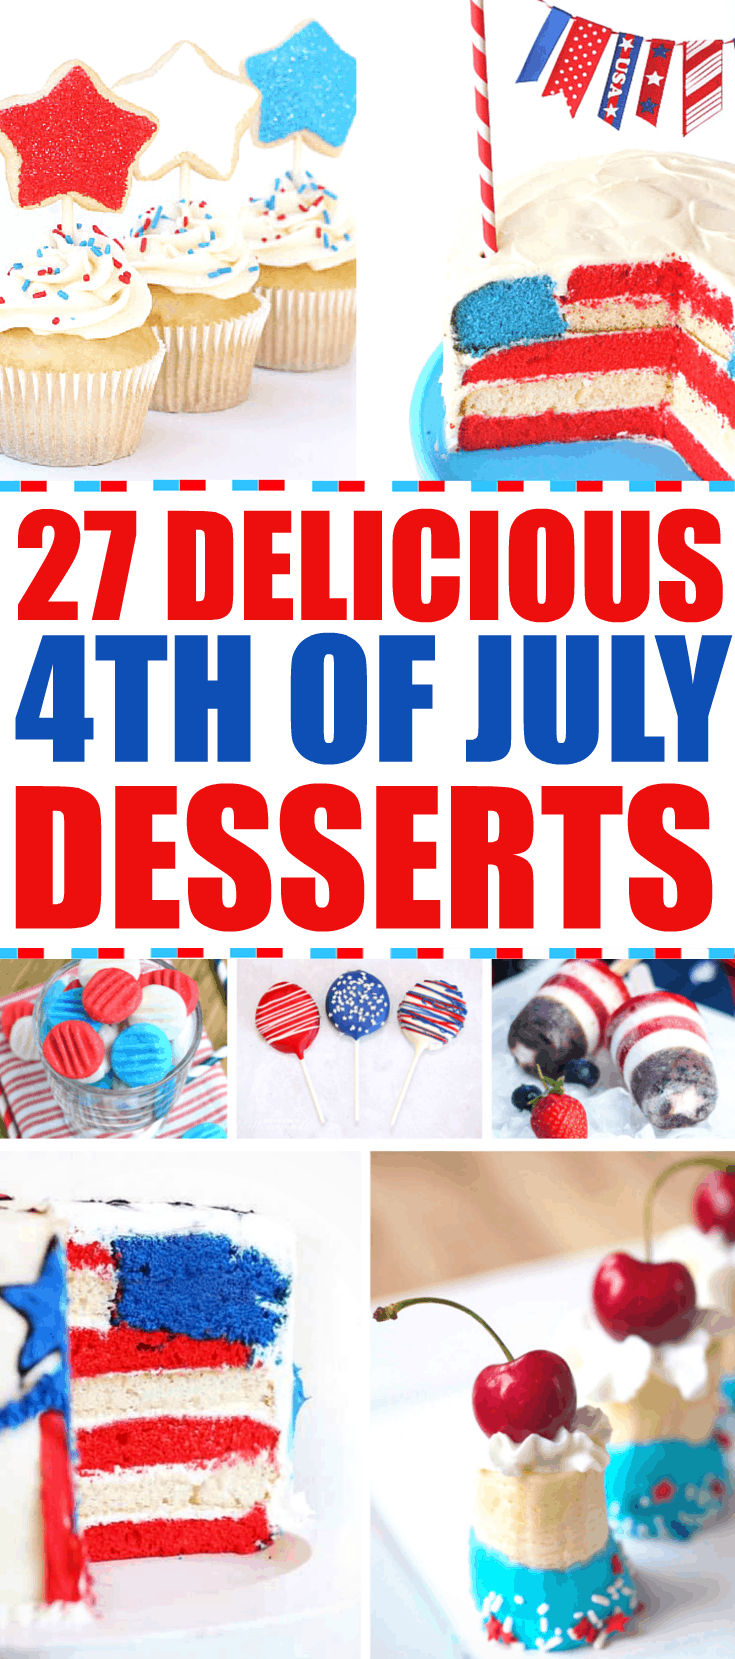 27 Delicious 4th of July Desserts at RoseBakes